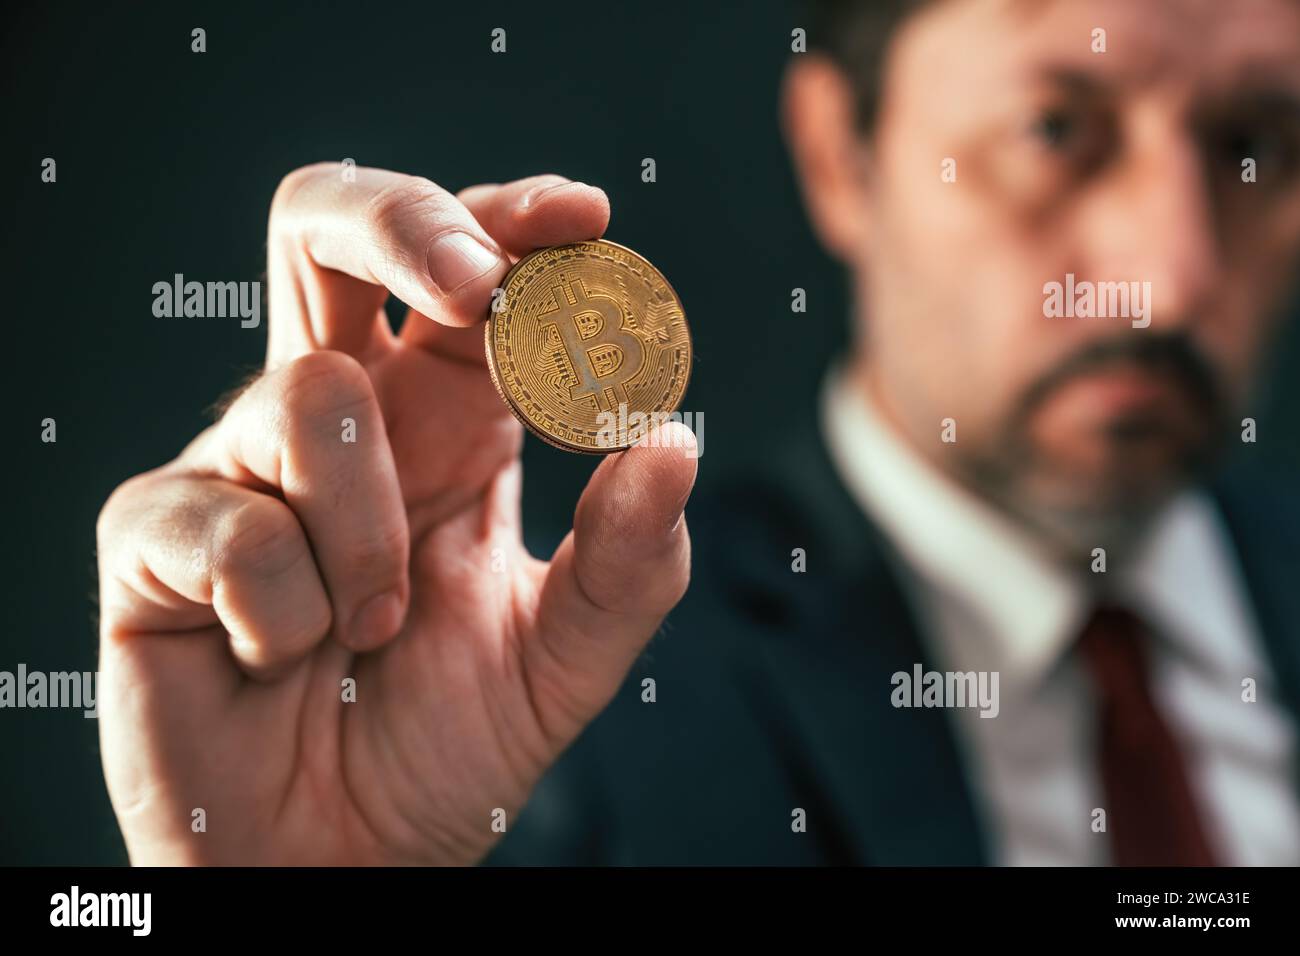 Cryptocurrency trader holding Bitcoin coin in hand Stock Photo